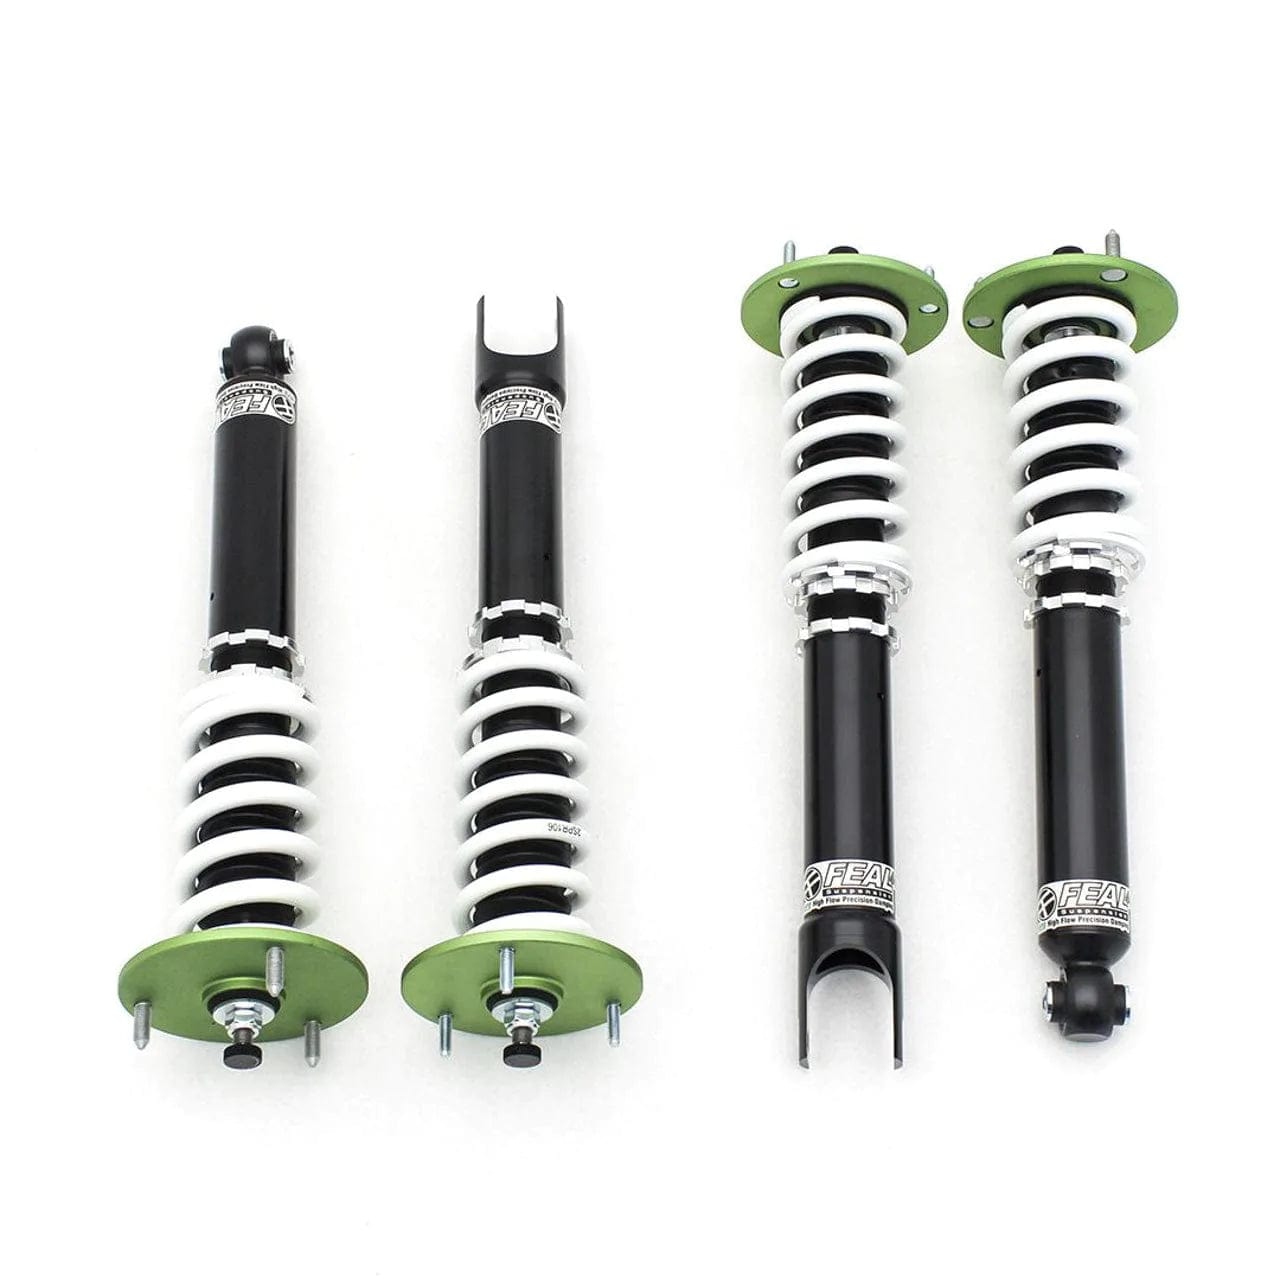 Feal 441 Heavy Front Coilovers (True Rear) - 1994-1998 Ford Mustang Cobra 441FO-02HT